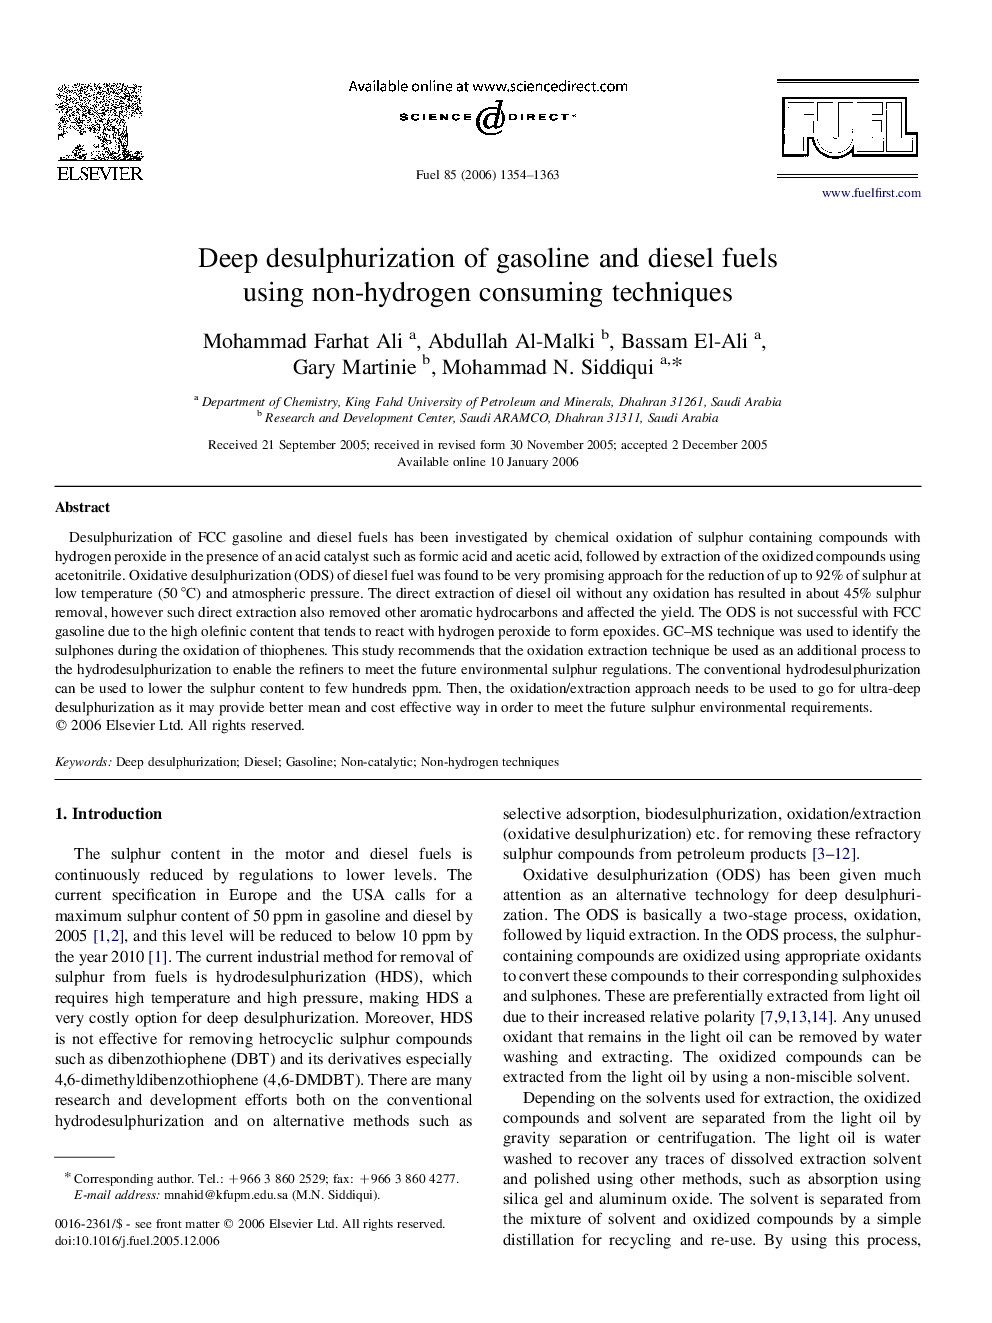 Deep desulphurization of gasoline and diesel fuels using non-hydrogen consuming techniques